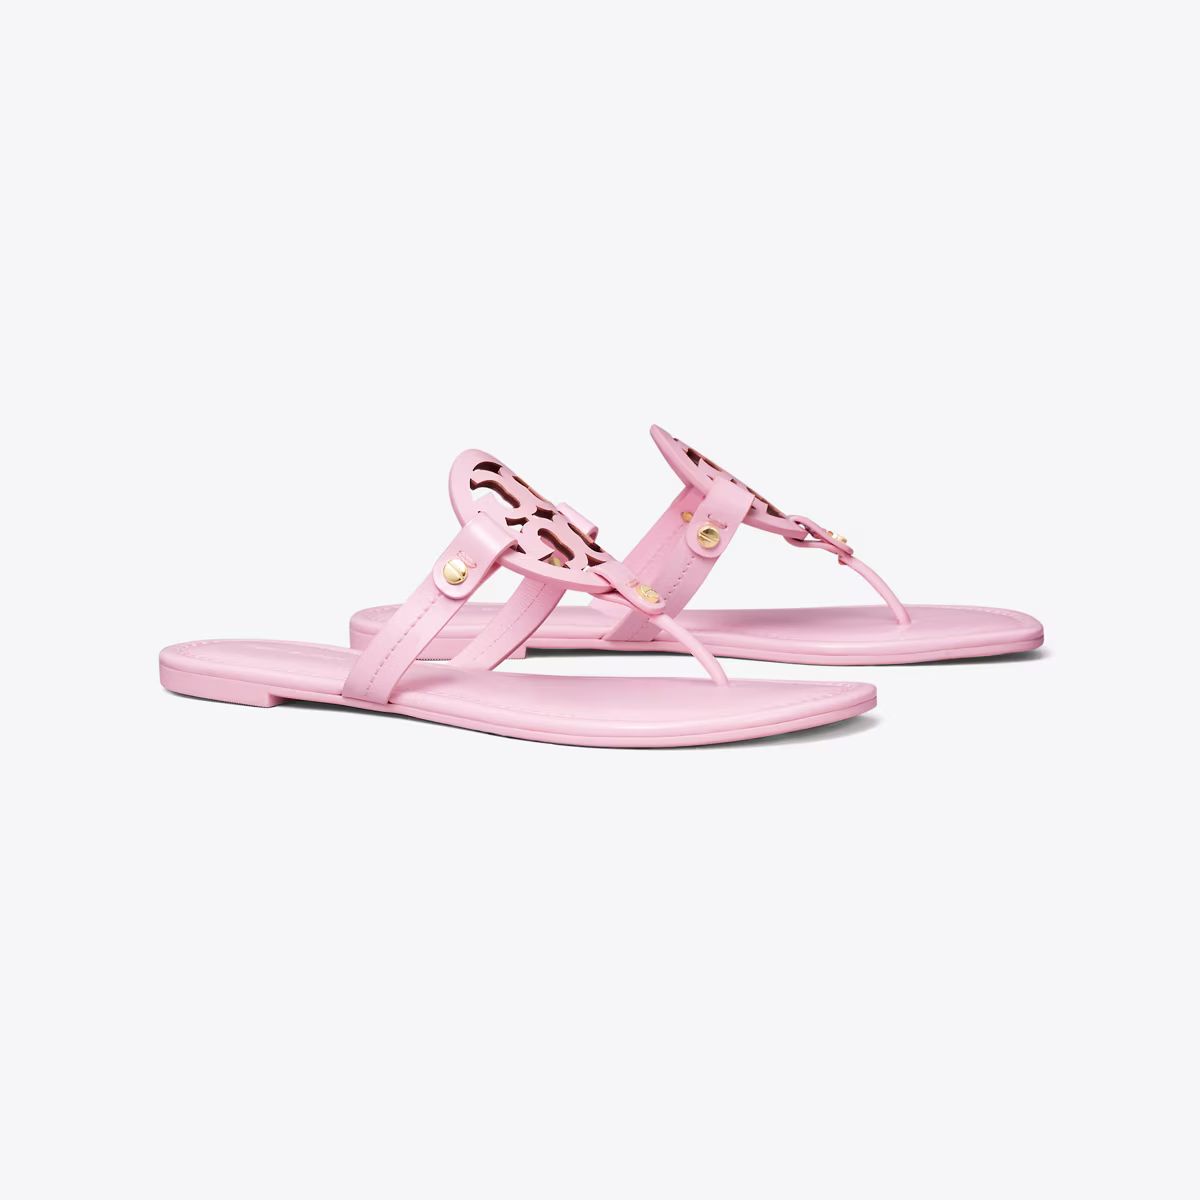 MILLER PATENT LEATHER SANDAL | Tory Burch (US)